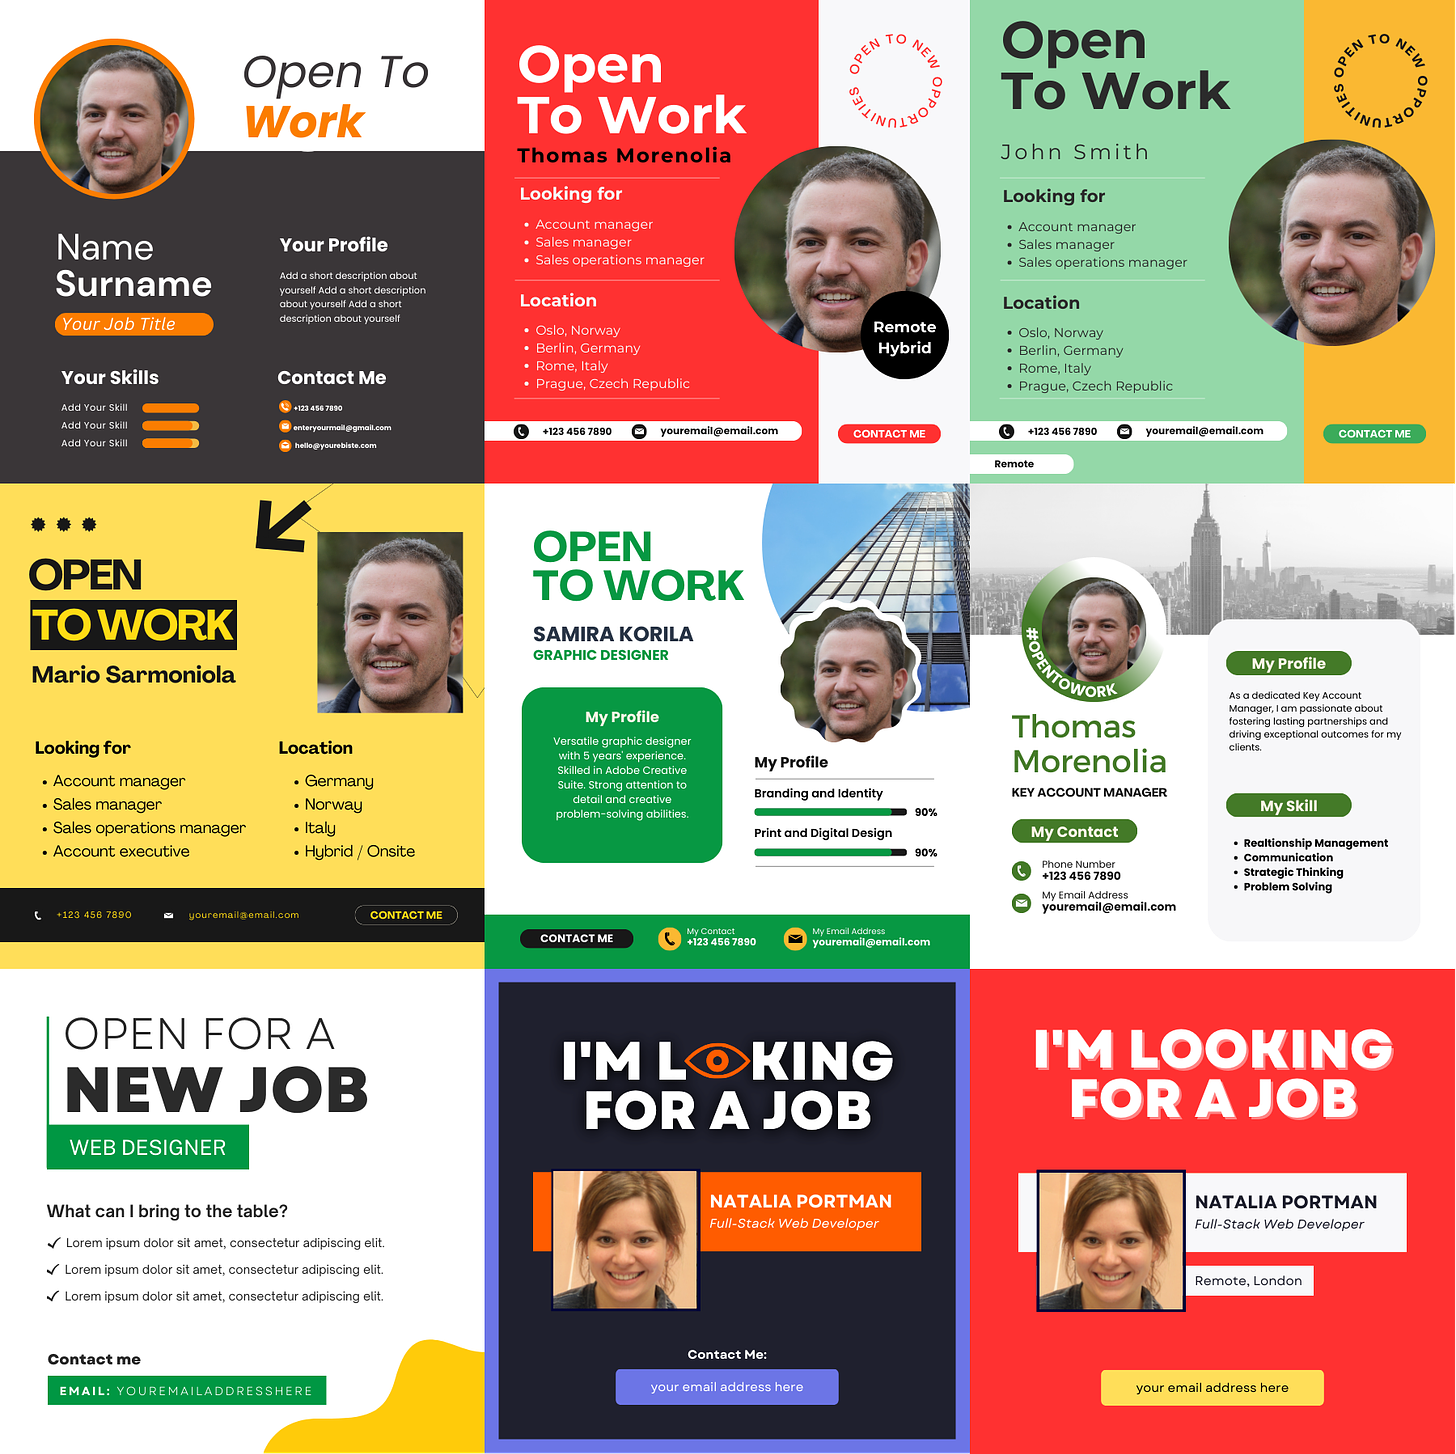 Free LinkedIn Open To Work Banners